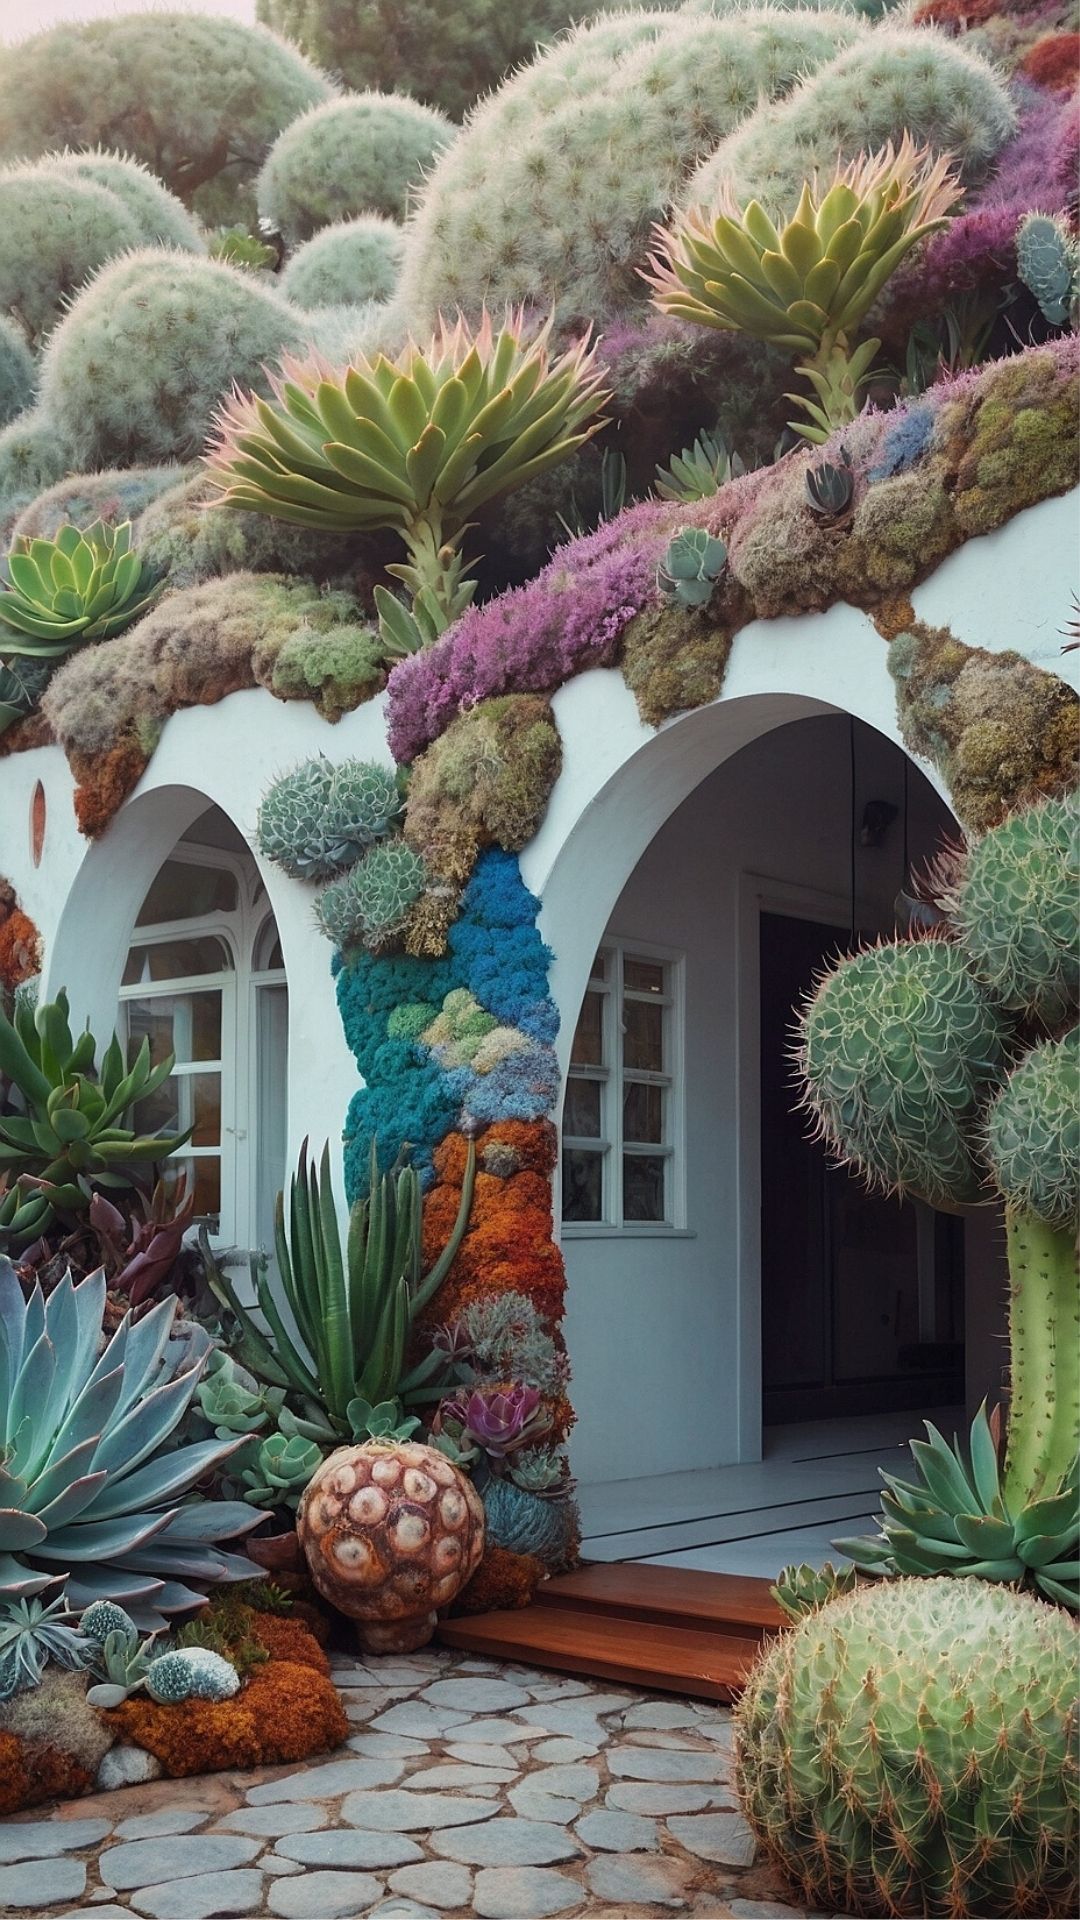 Succulent Overhang: A Living Archway of Textures